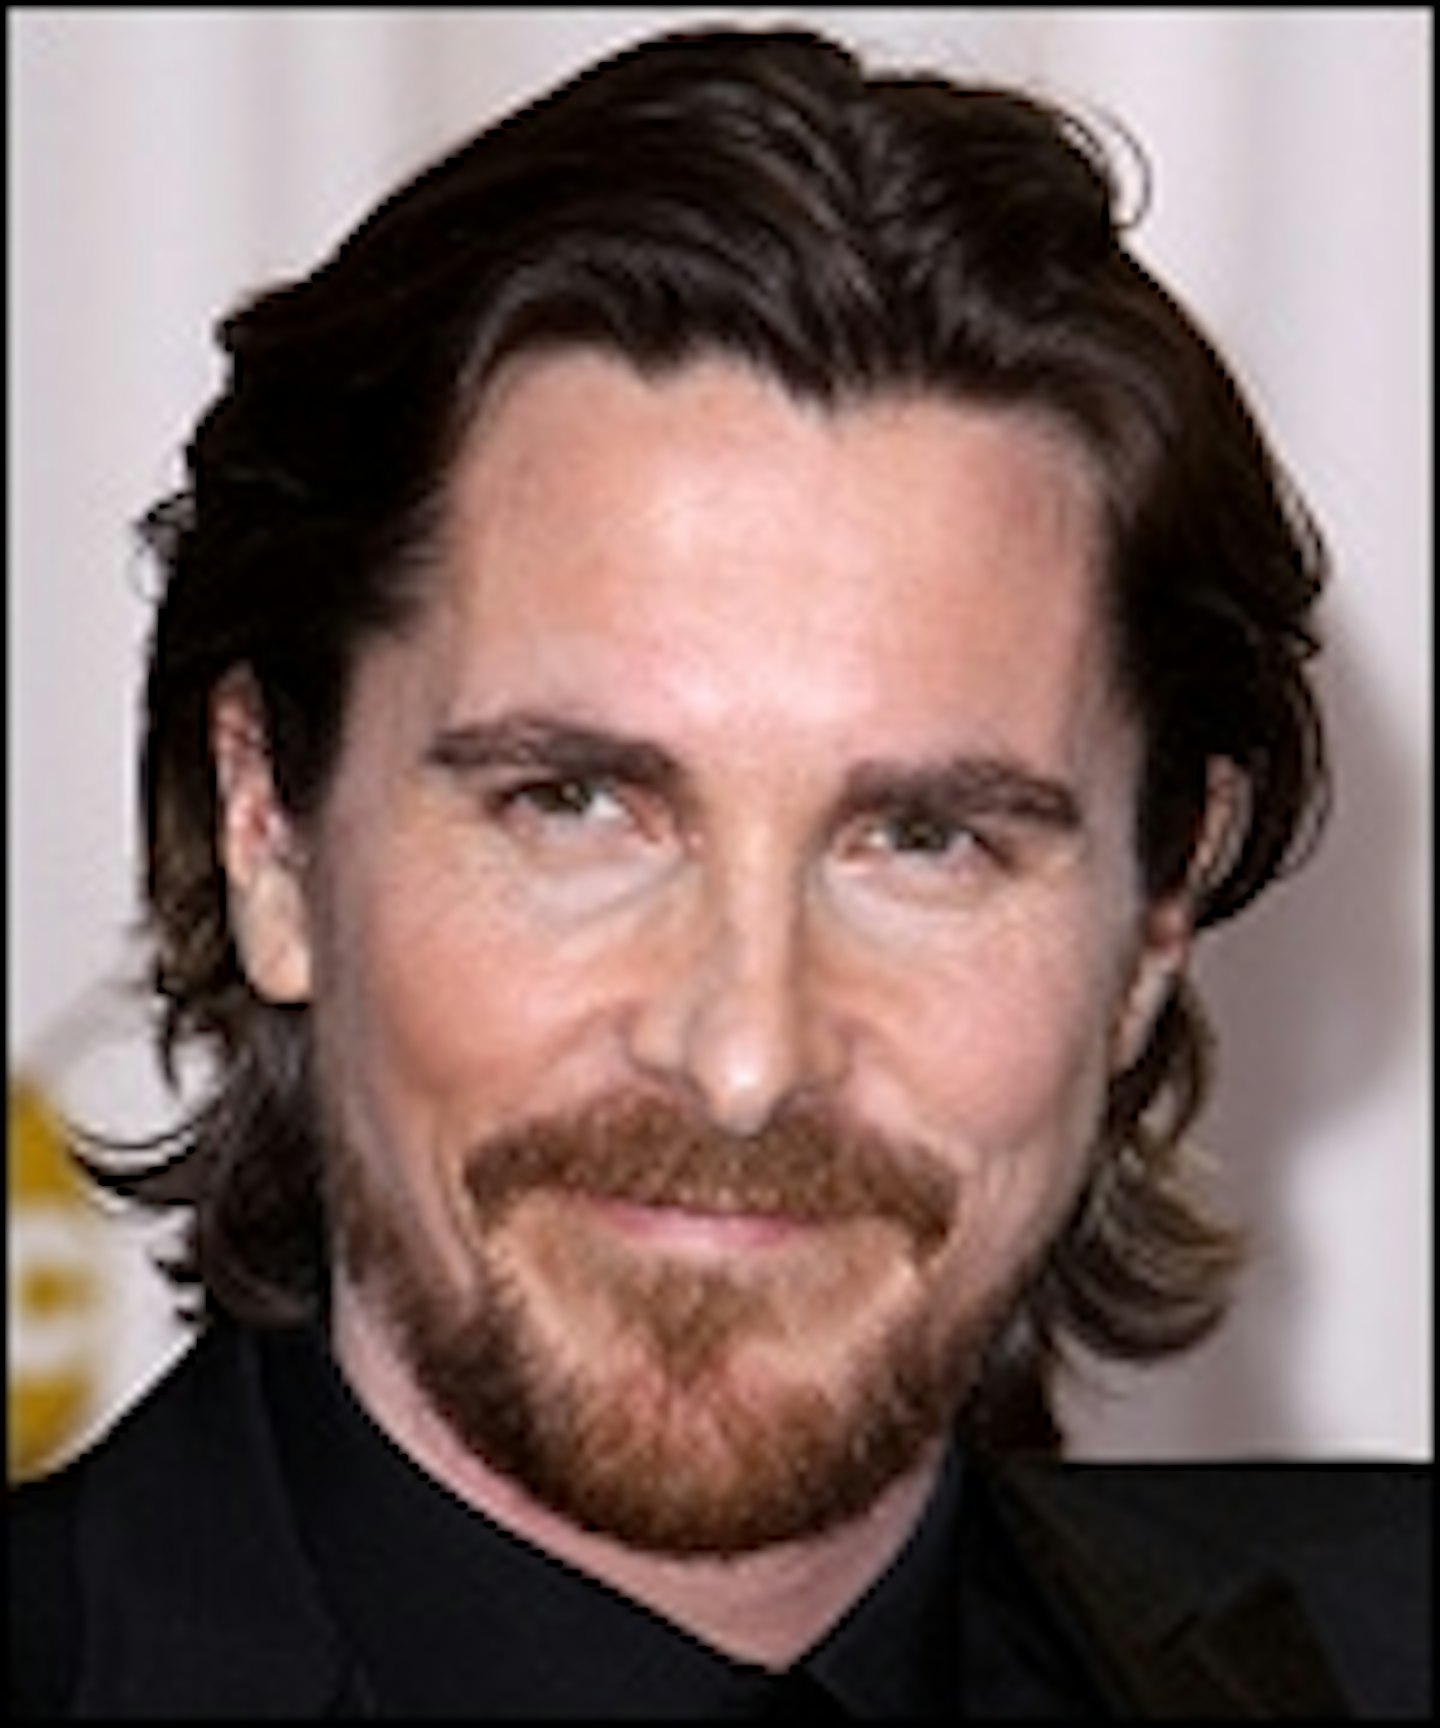 Christian Bale On For The Promise